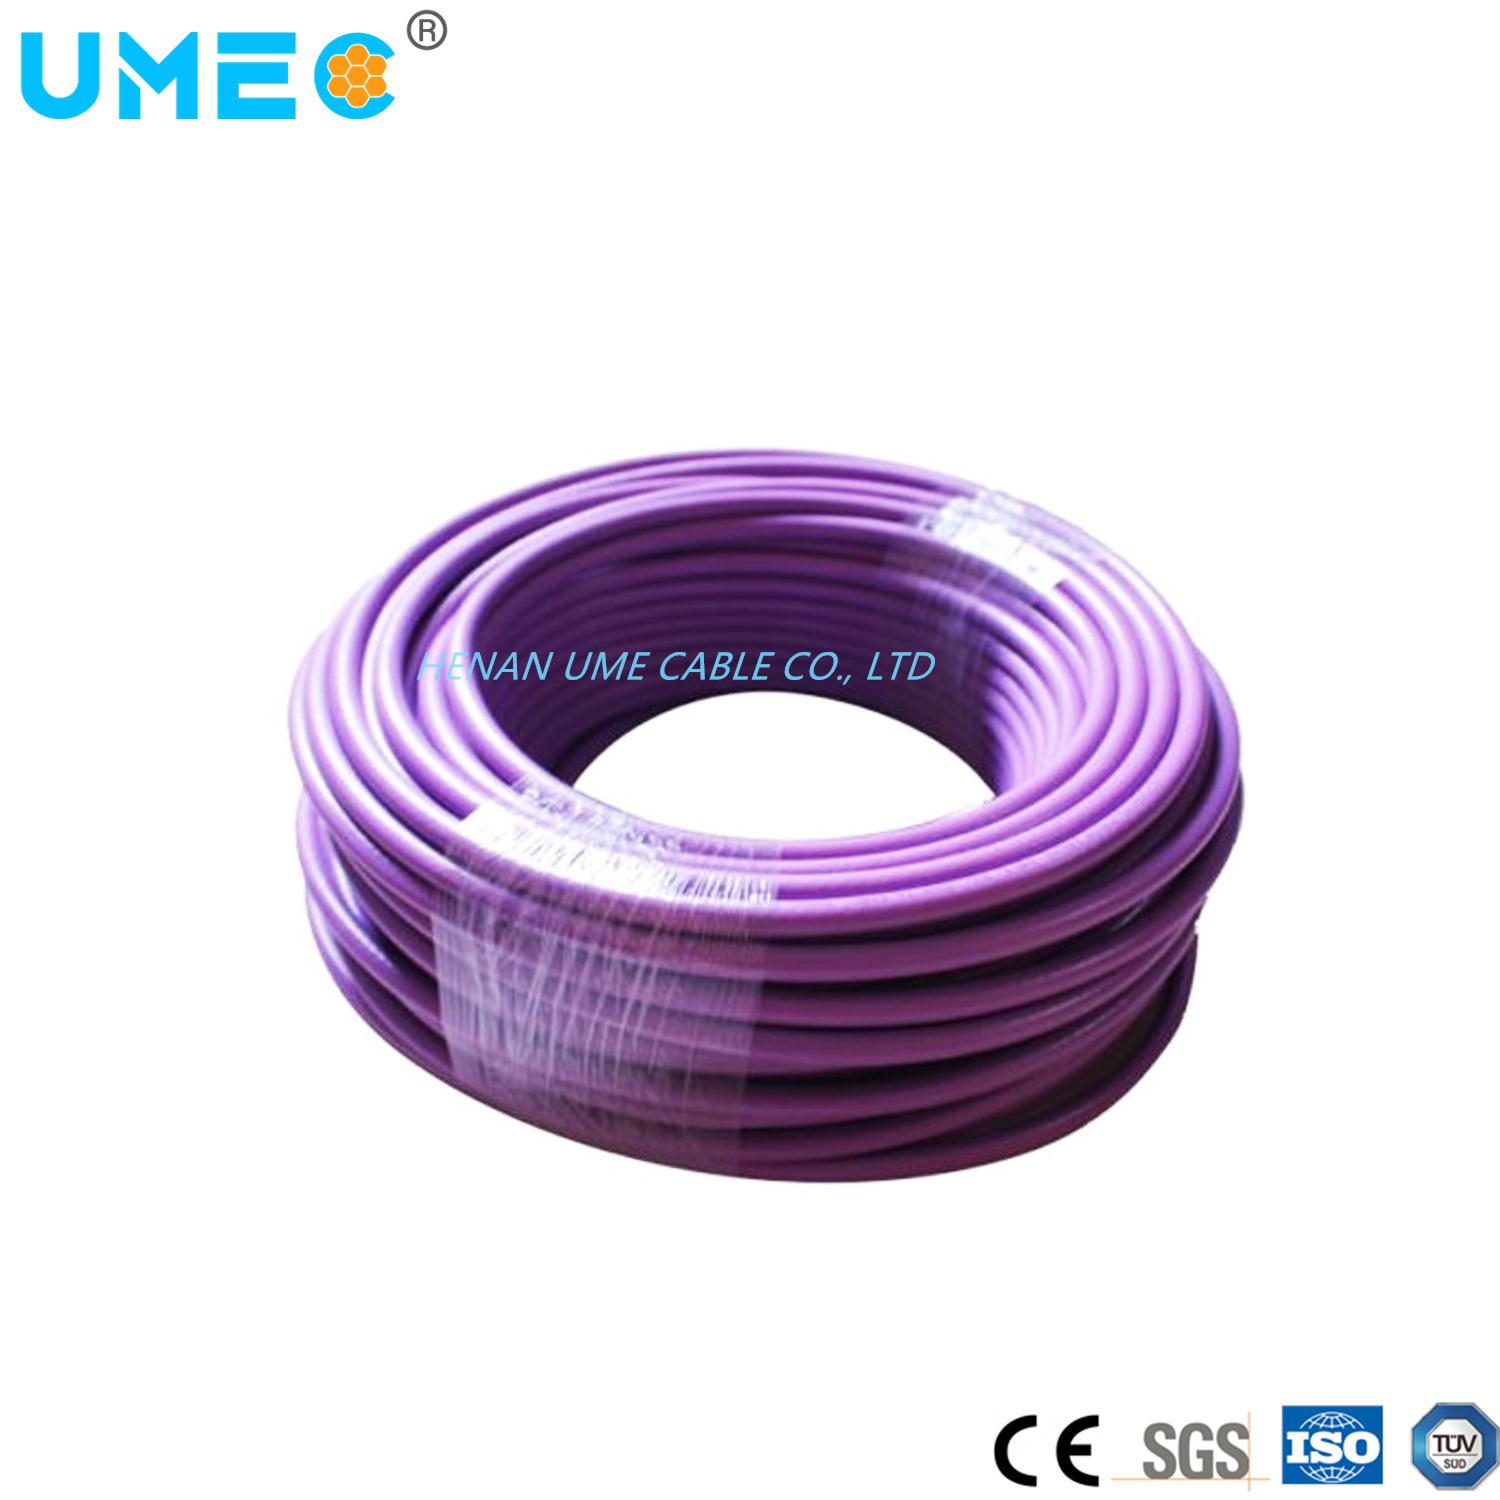 Wire and Cable/6xv Purple Cable 6xv1830-0eh10 Copper Conductor Low Voltage Connection Cable